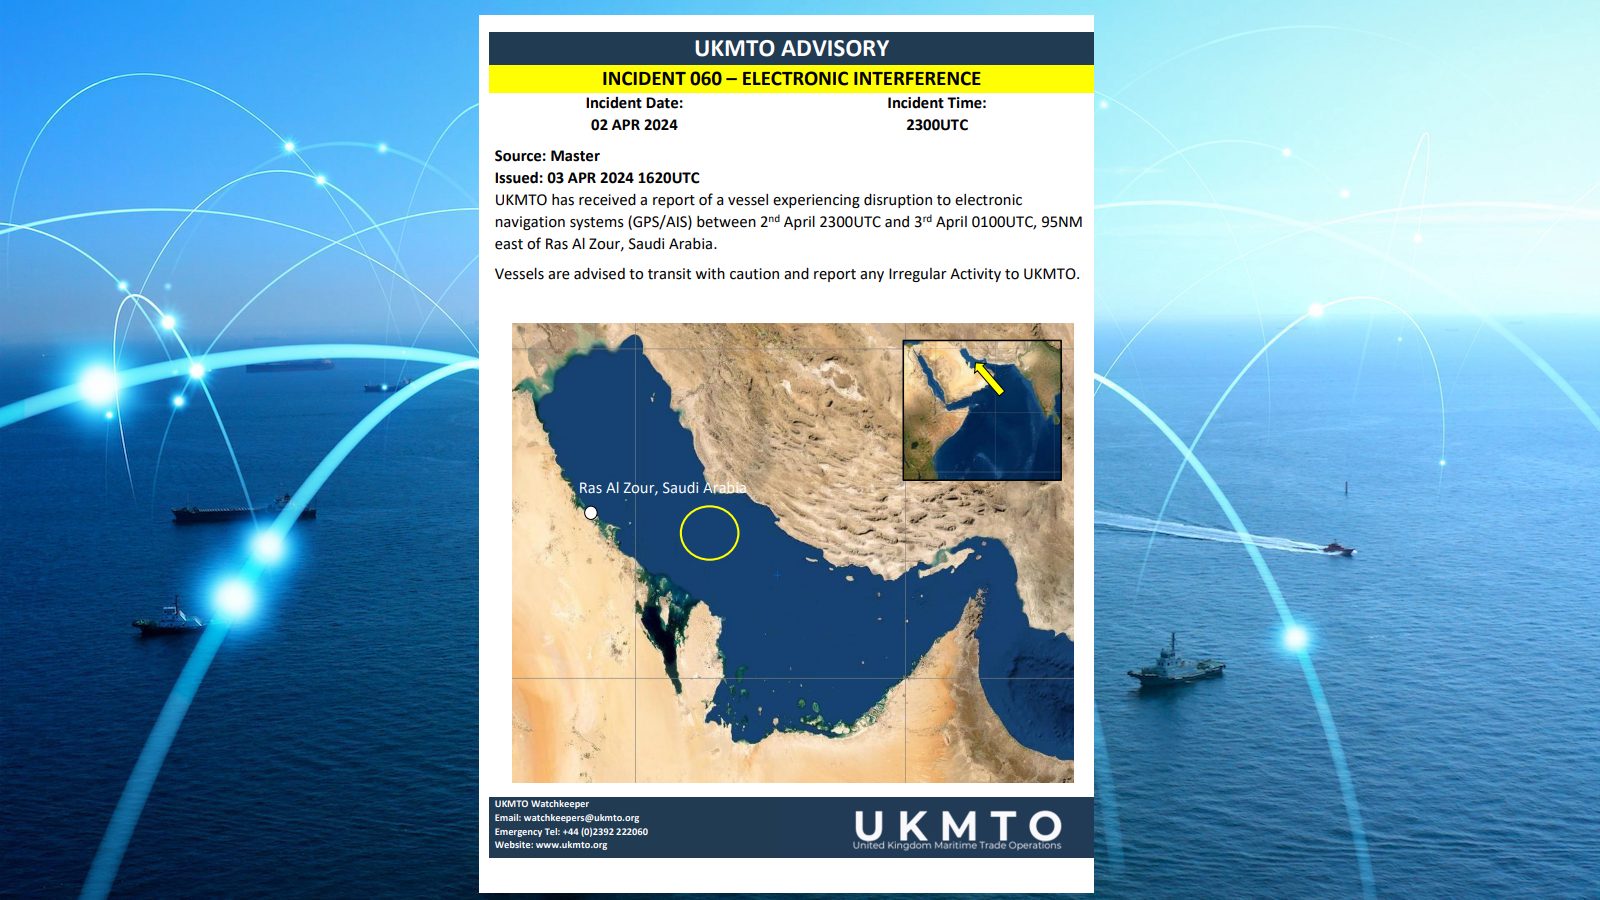 UKMTO incident alert overlaid on an image of ships